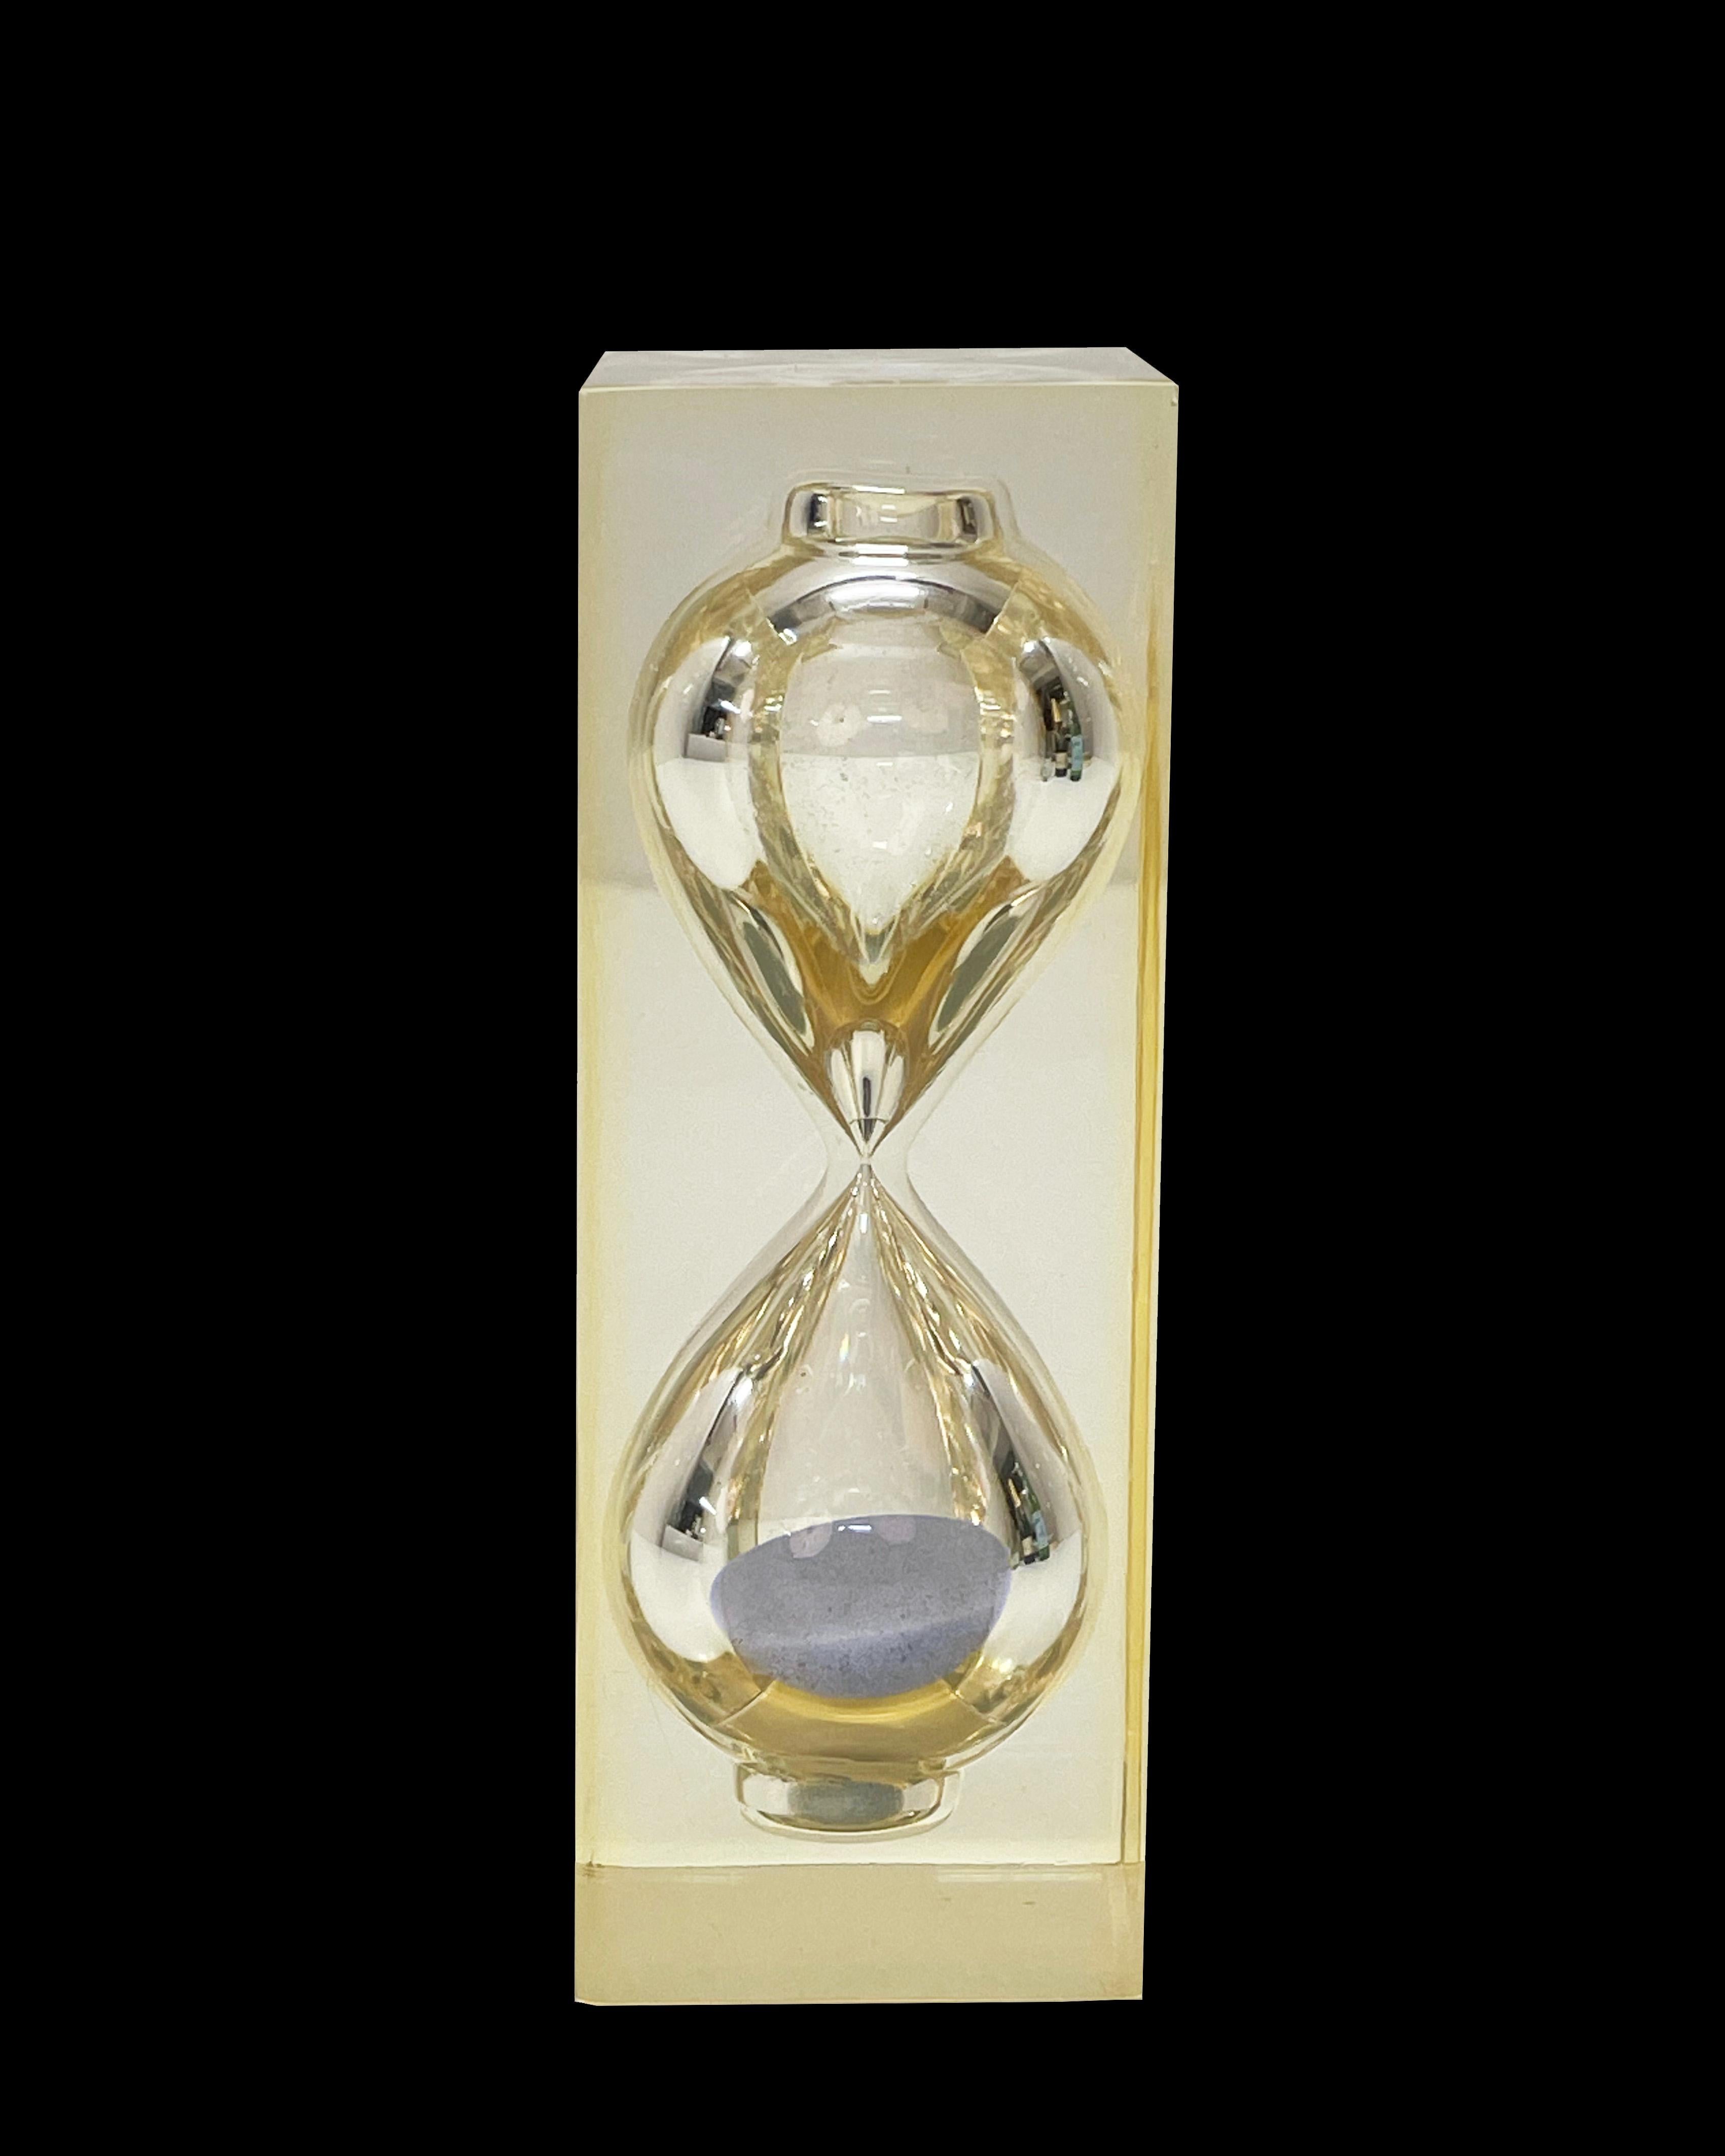 Midcentury Lucite Hourglass Sand Timer Sculpture After Charles Hollis Jones 1970 For Sale 2